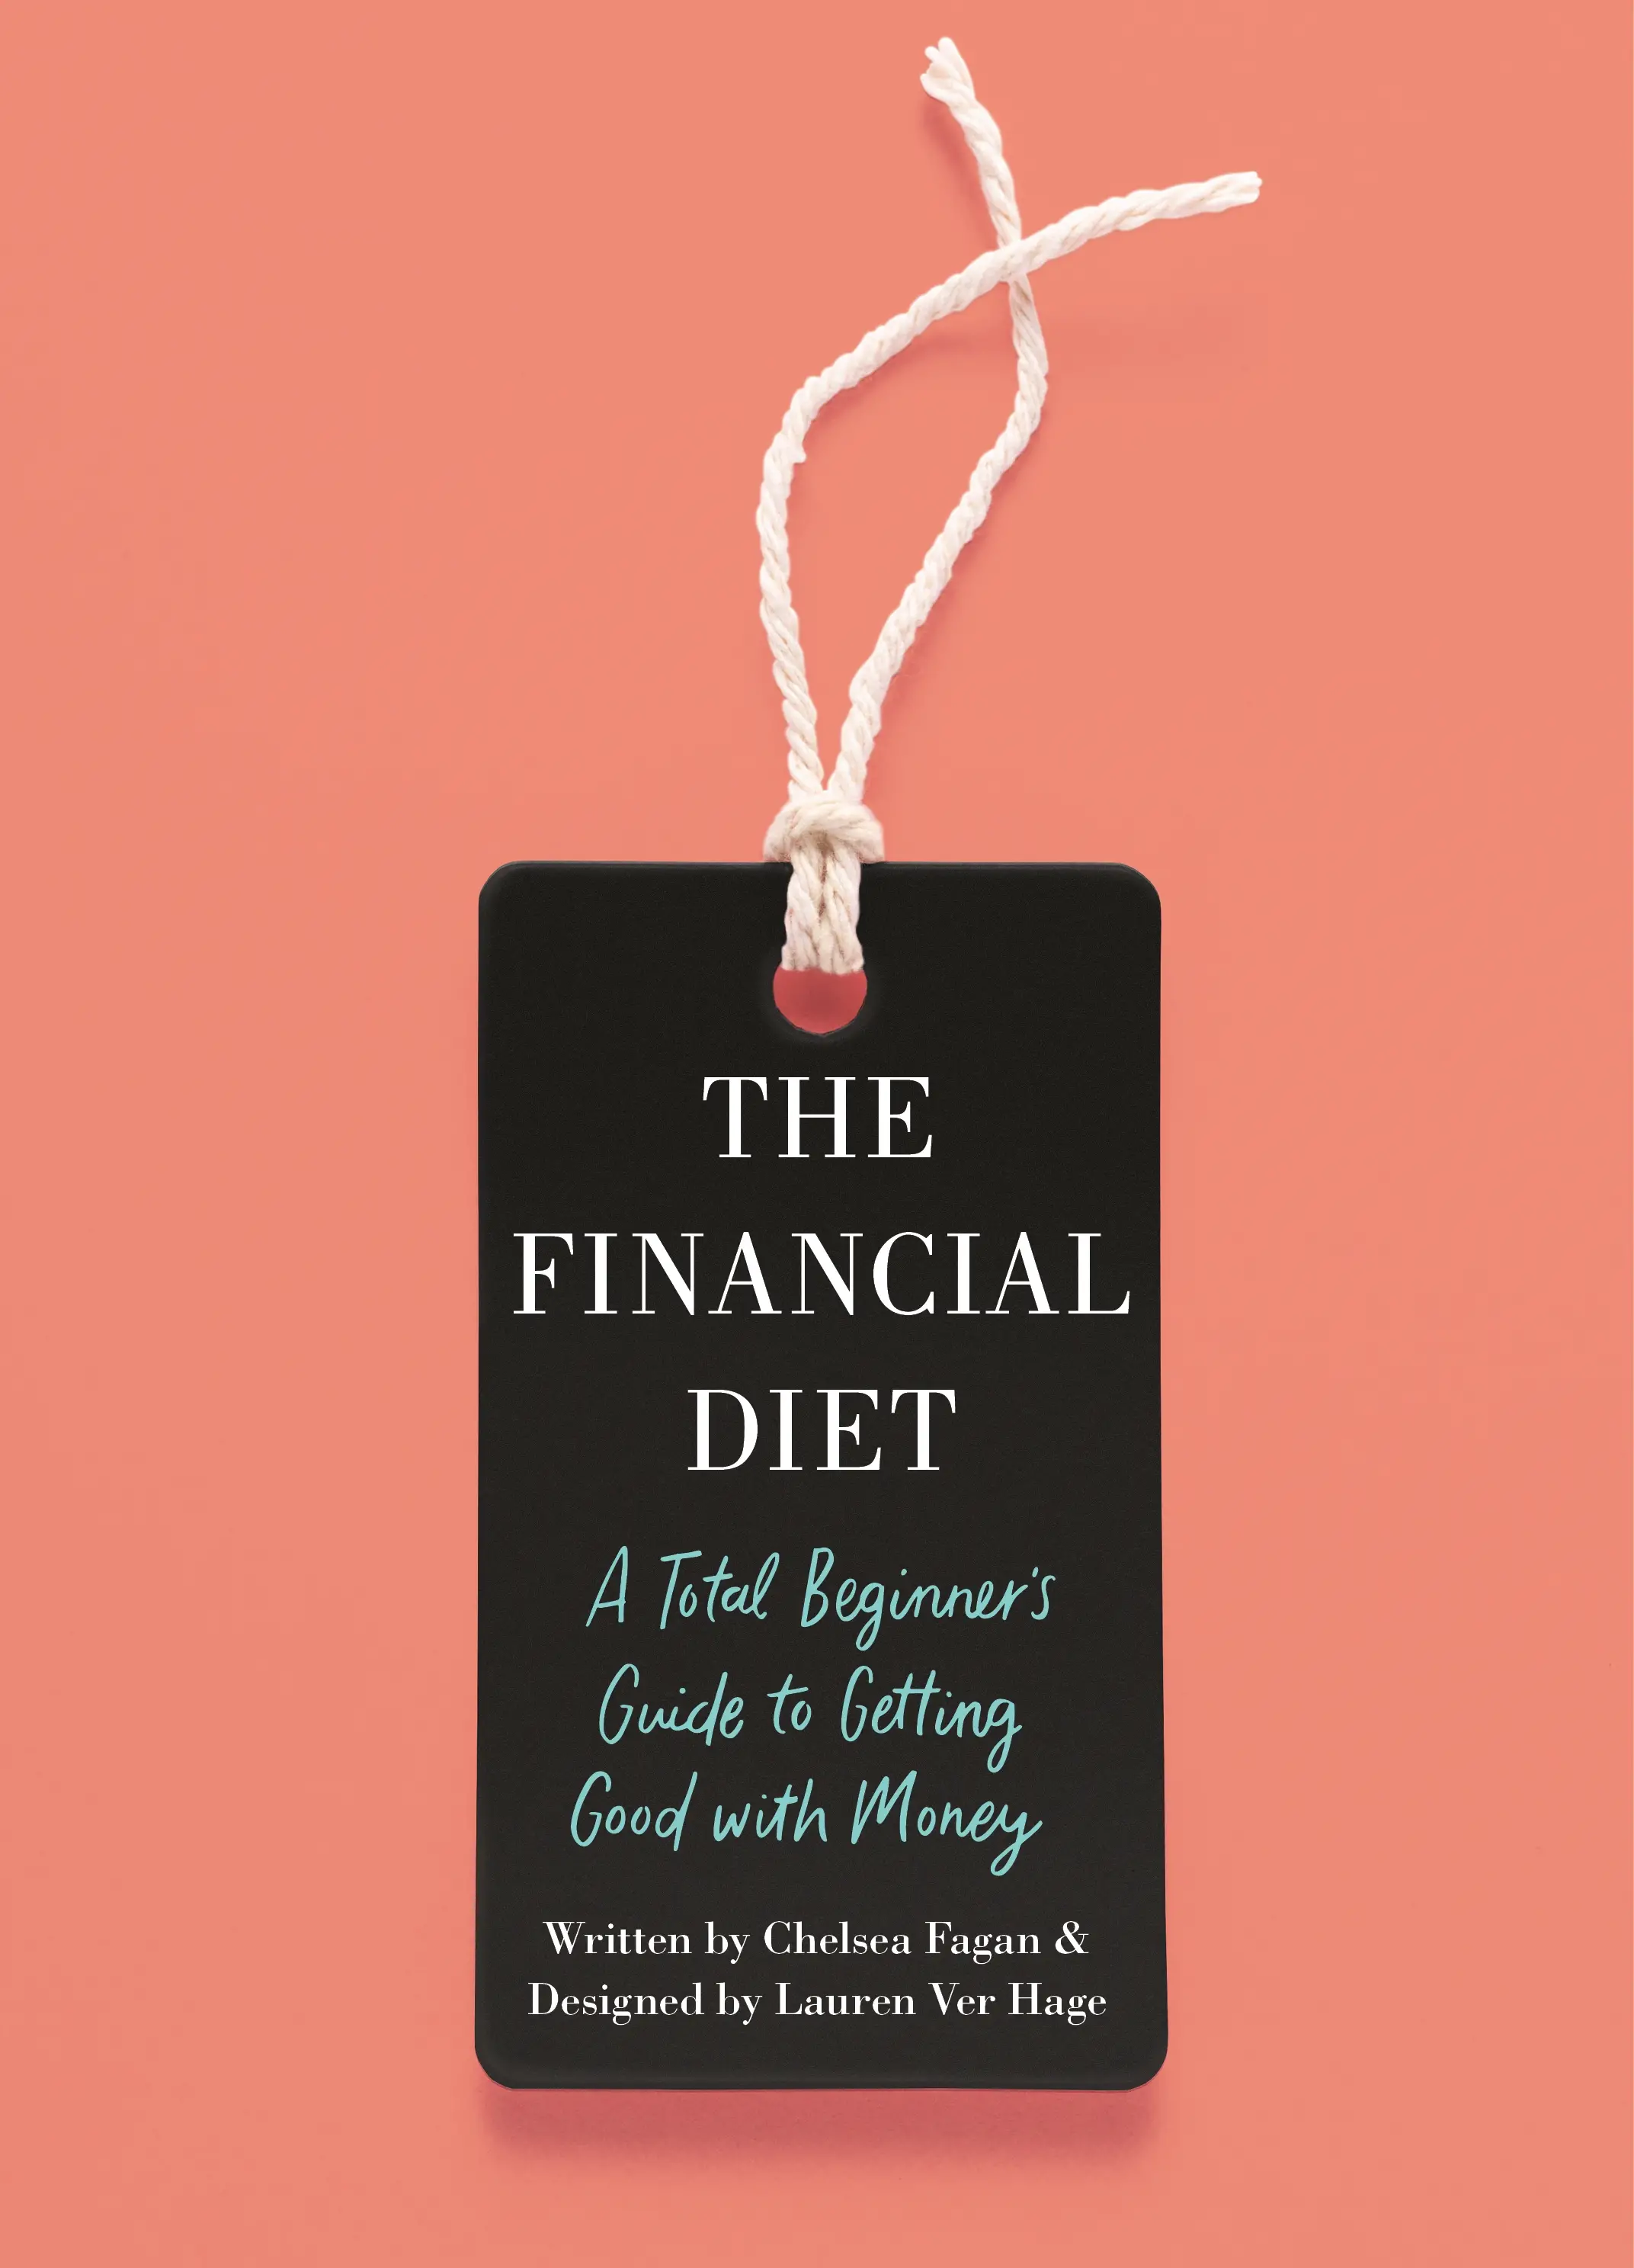 [Download] The Financial Diet by Chelsea Fagan  pdf book